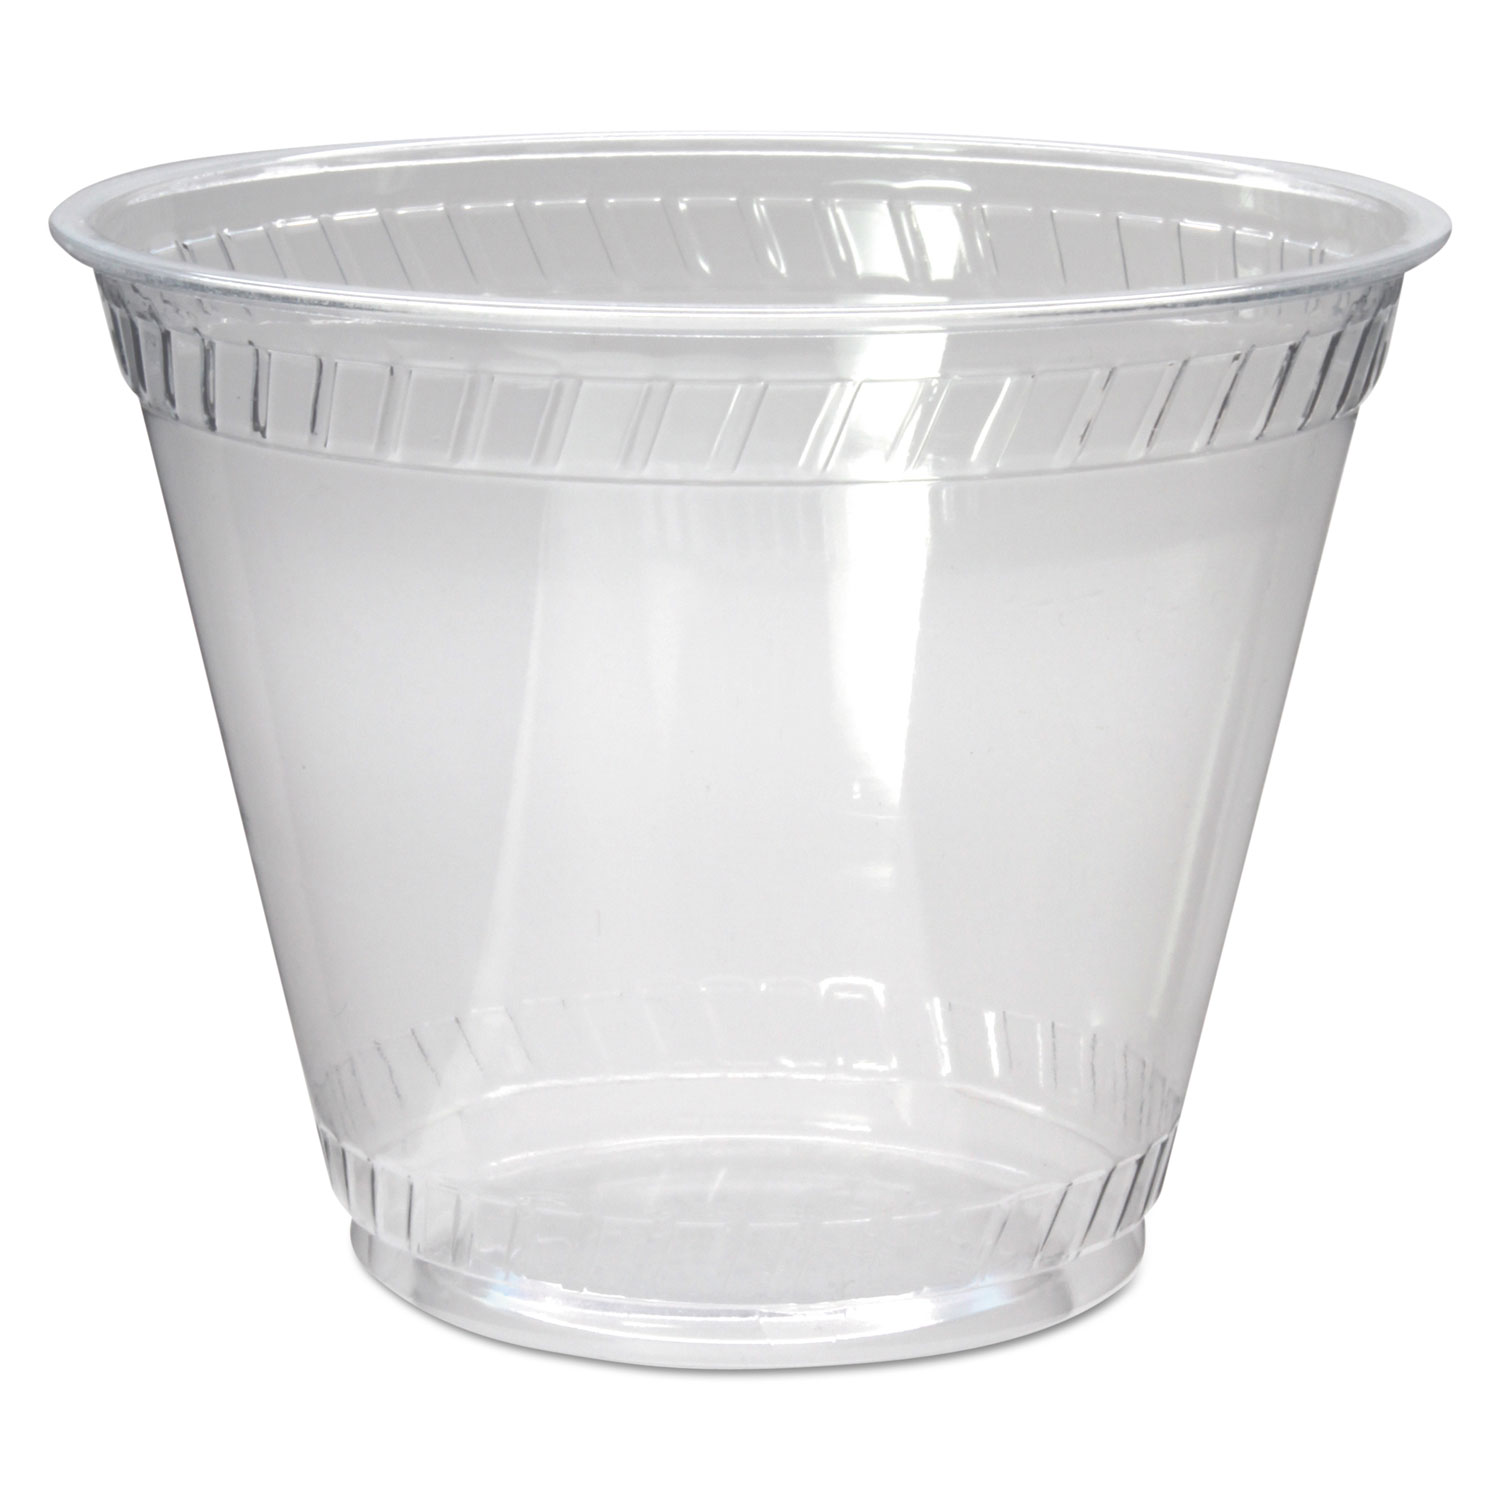  Fabri-Kal 9509100 Greenware Cold Drink Cups, Old Fashioned, 9 oz, Clear, 1000/Carton (FABGC9OF) 